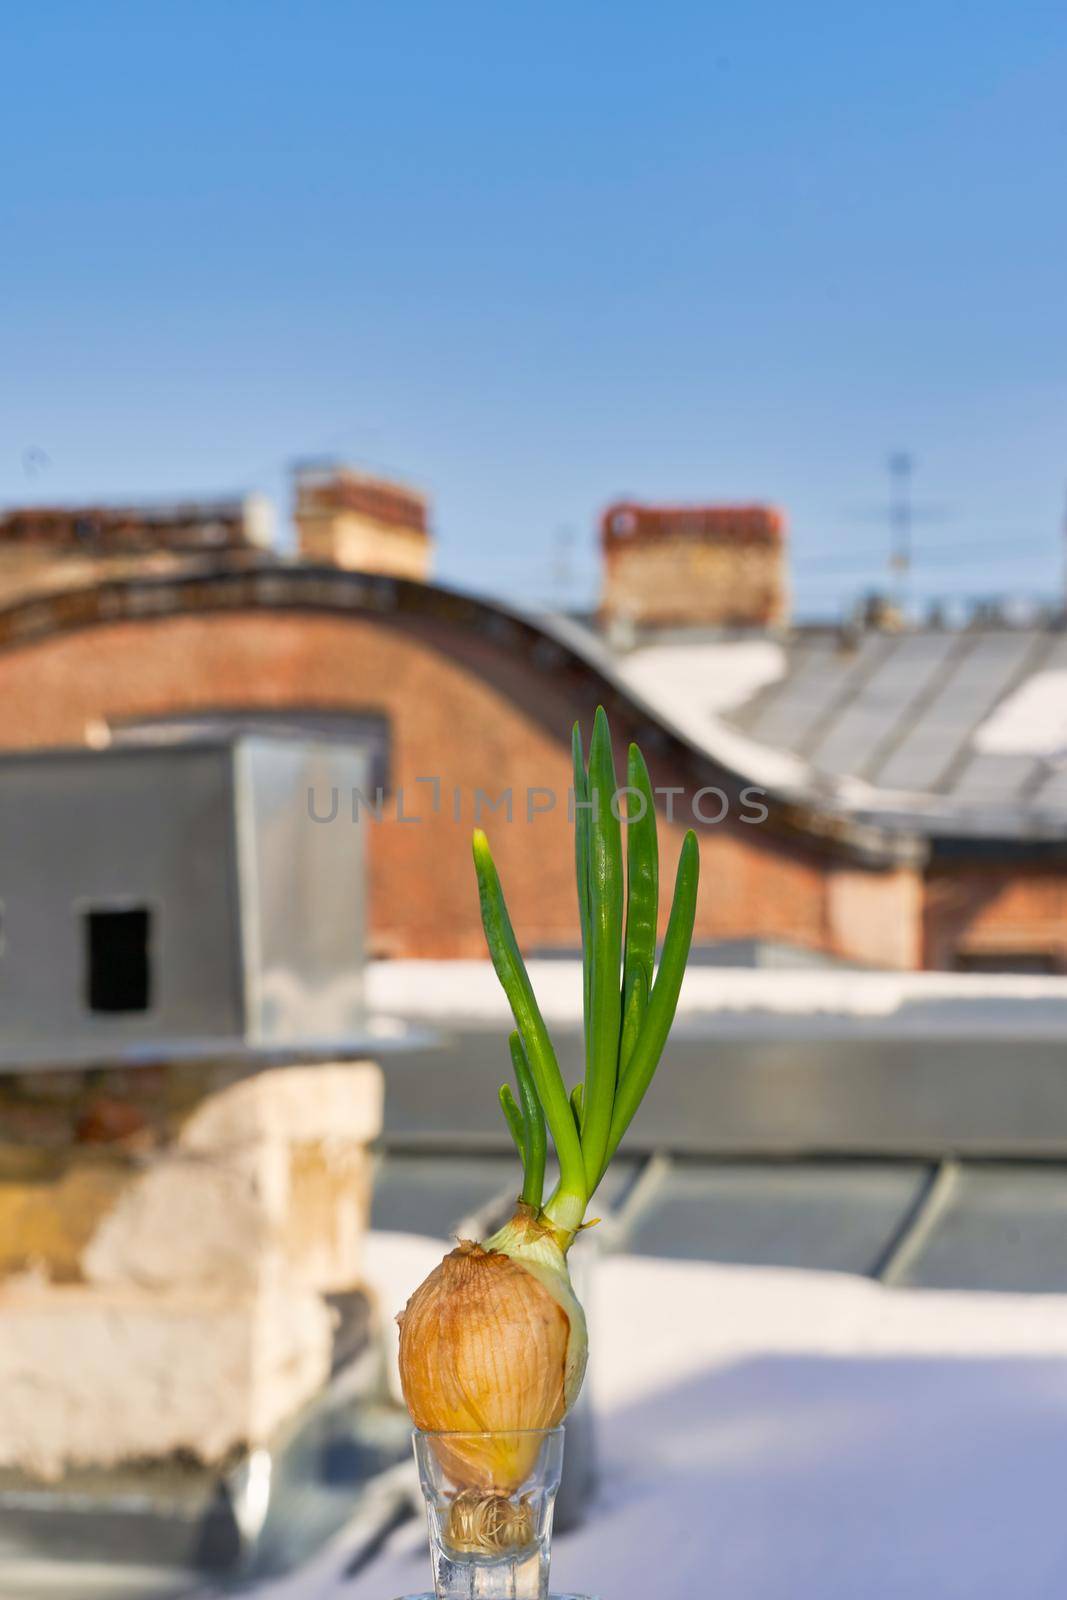 A bulb with spicy green shoots is grown in winter at home on a windowsill by vizland